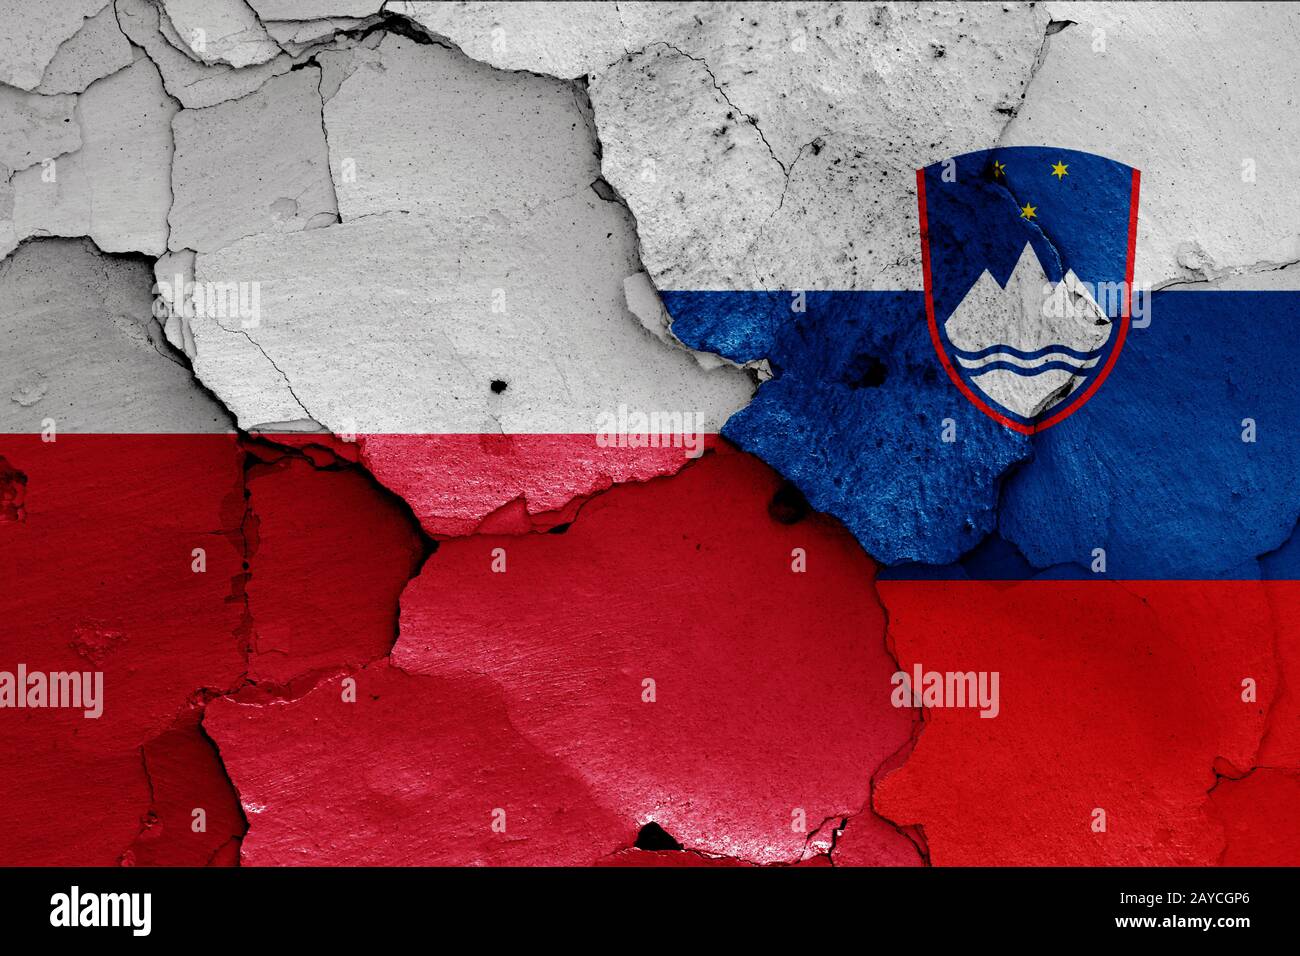 flags of Poland and Slovenia painted on cracked wall Stock Photo